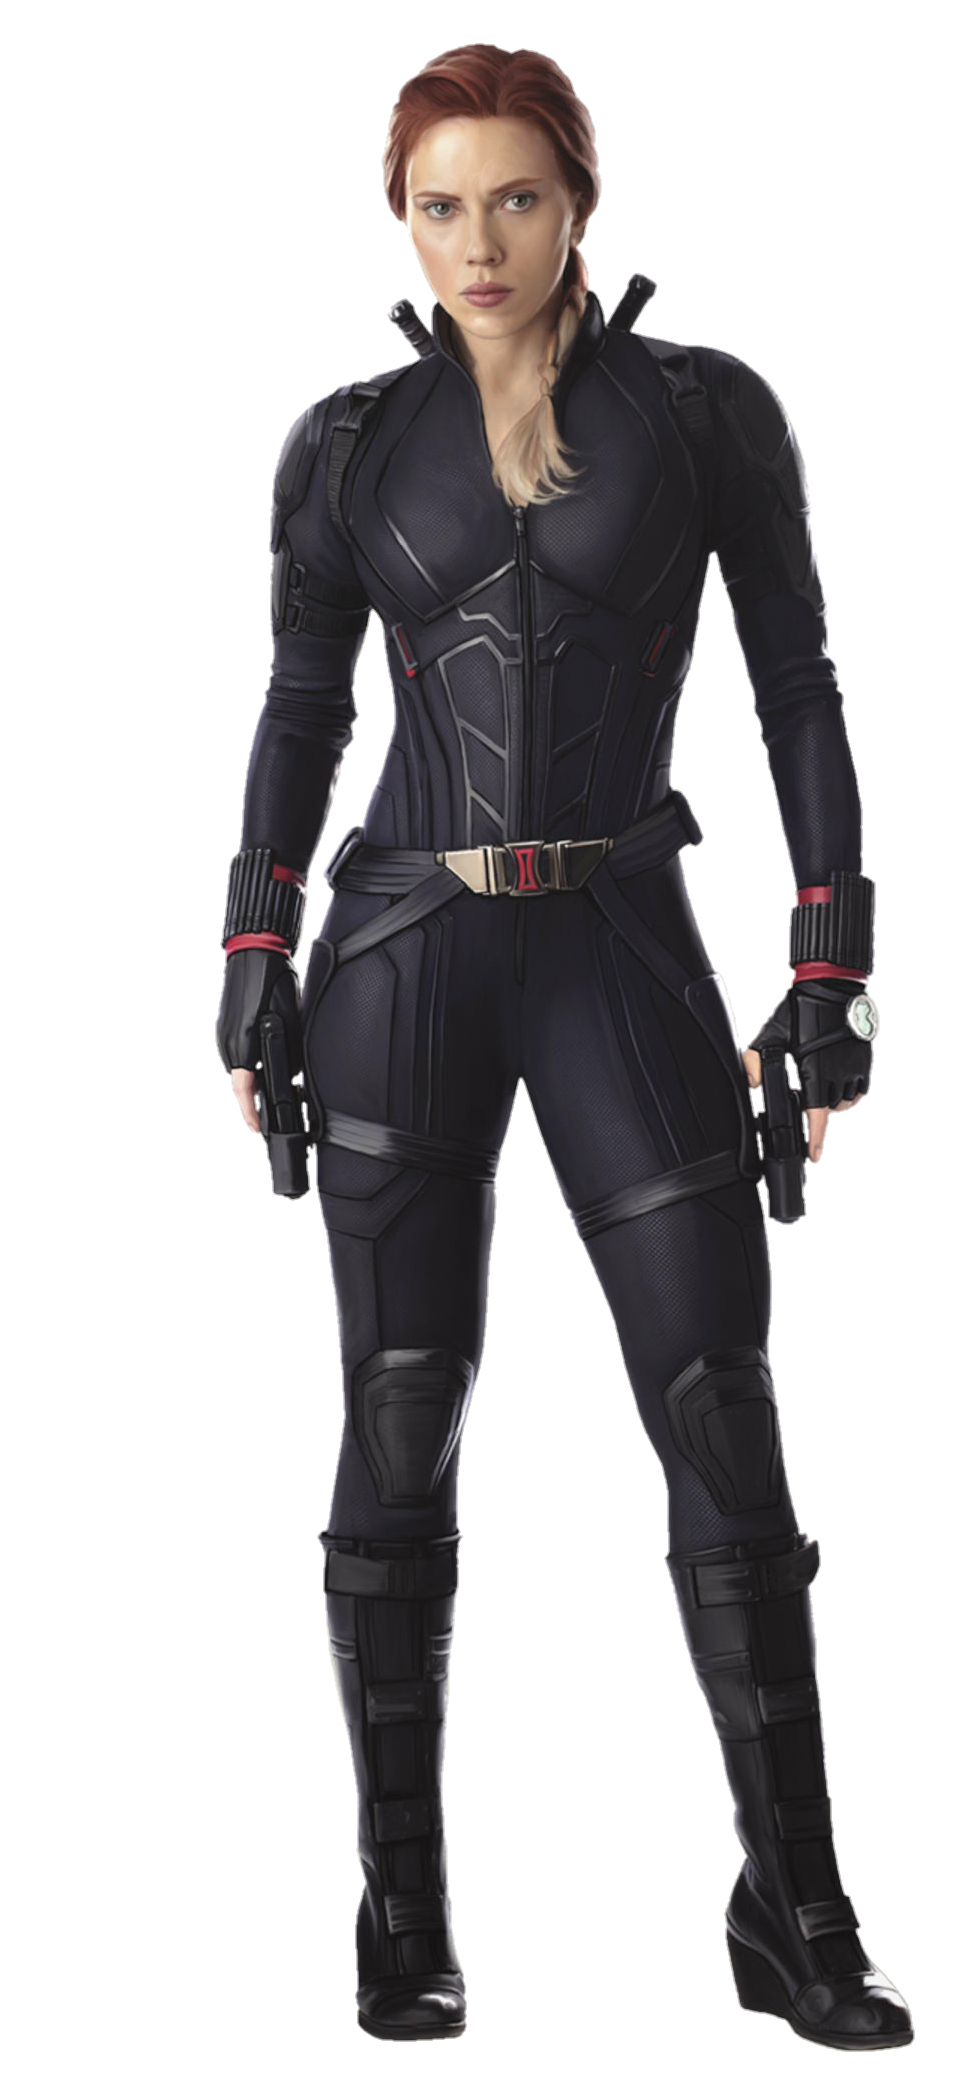 Black Widow (Marvel Cinematic Universe) | Characters in Fiction Wiki ...